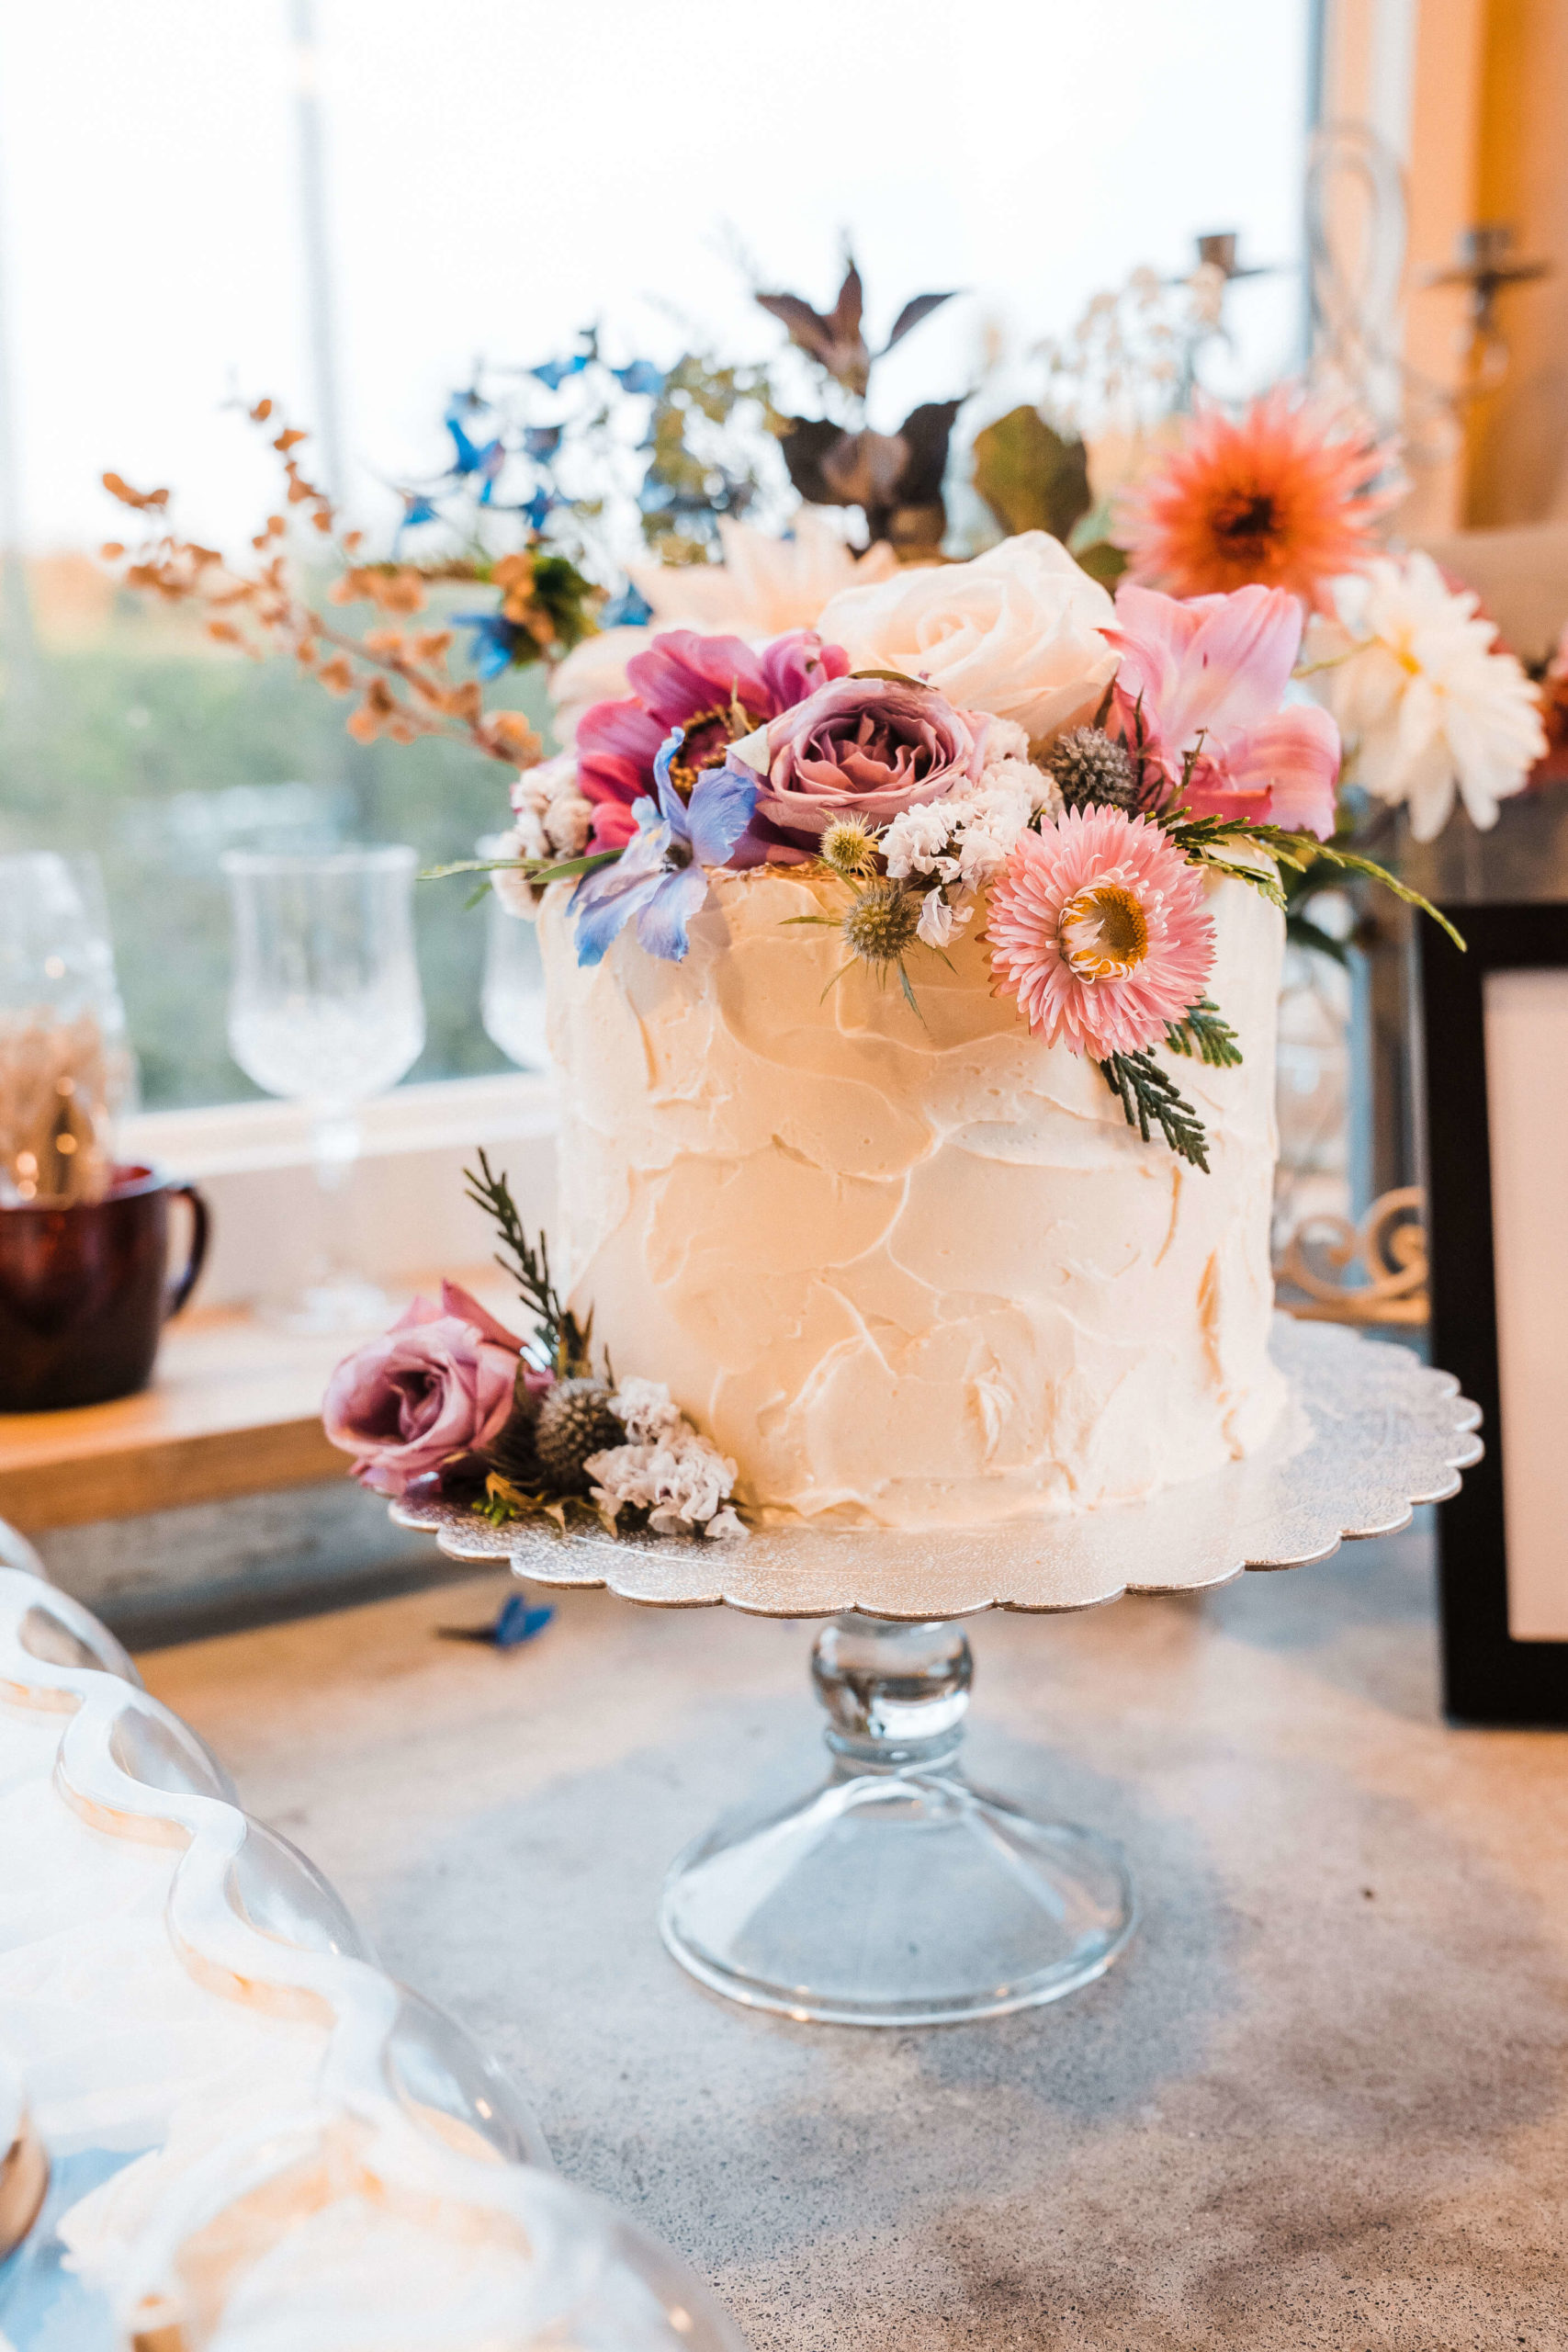 Wedding cake with colorful flowers